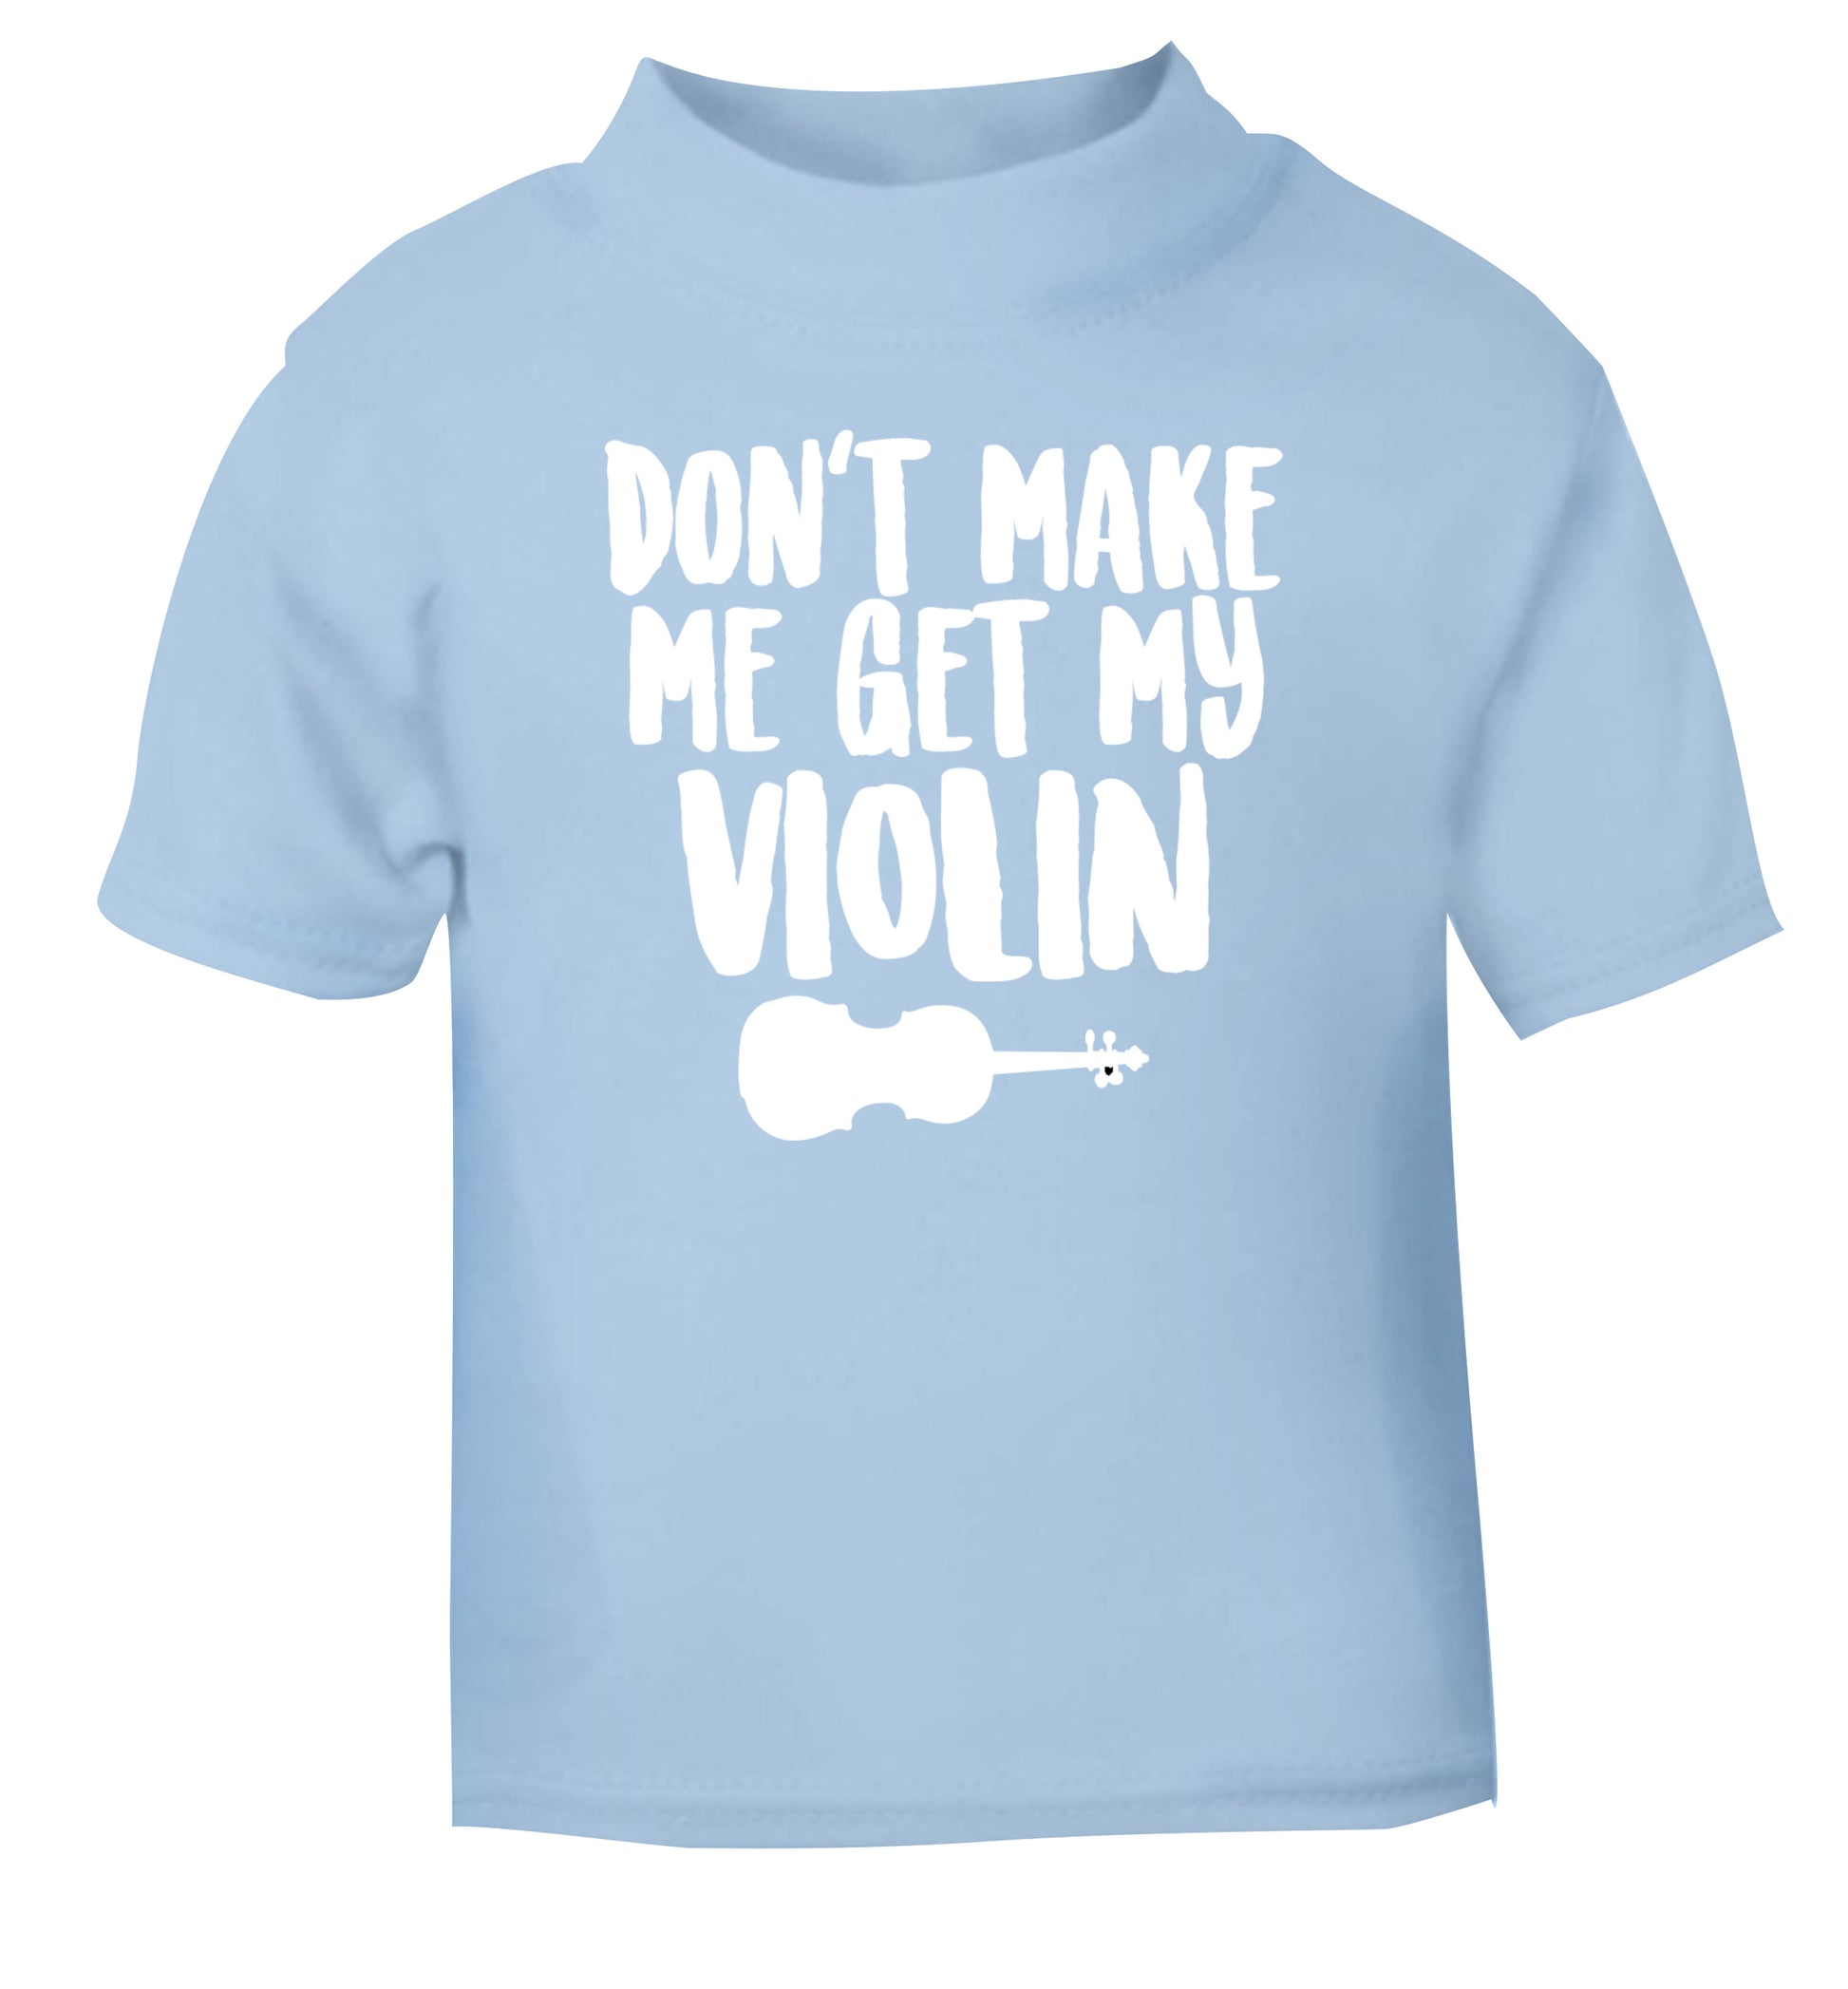 Don't make me get my violin light blue Baby Toddler Tshirt 2 Years